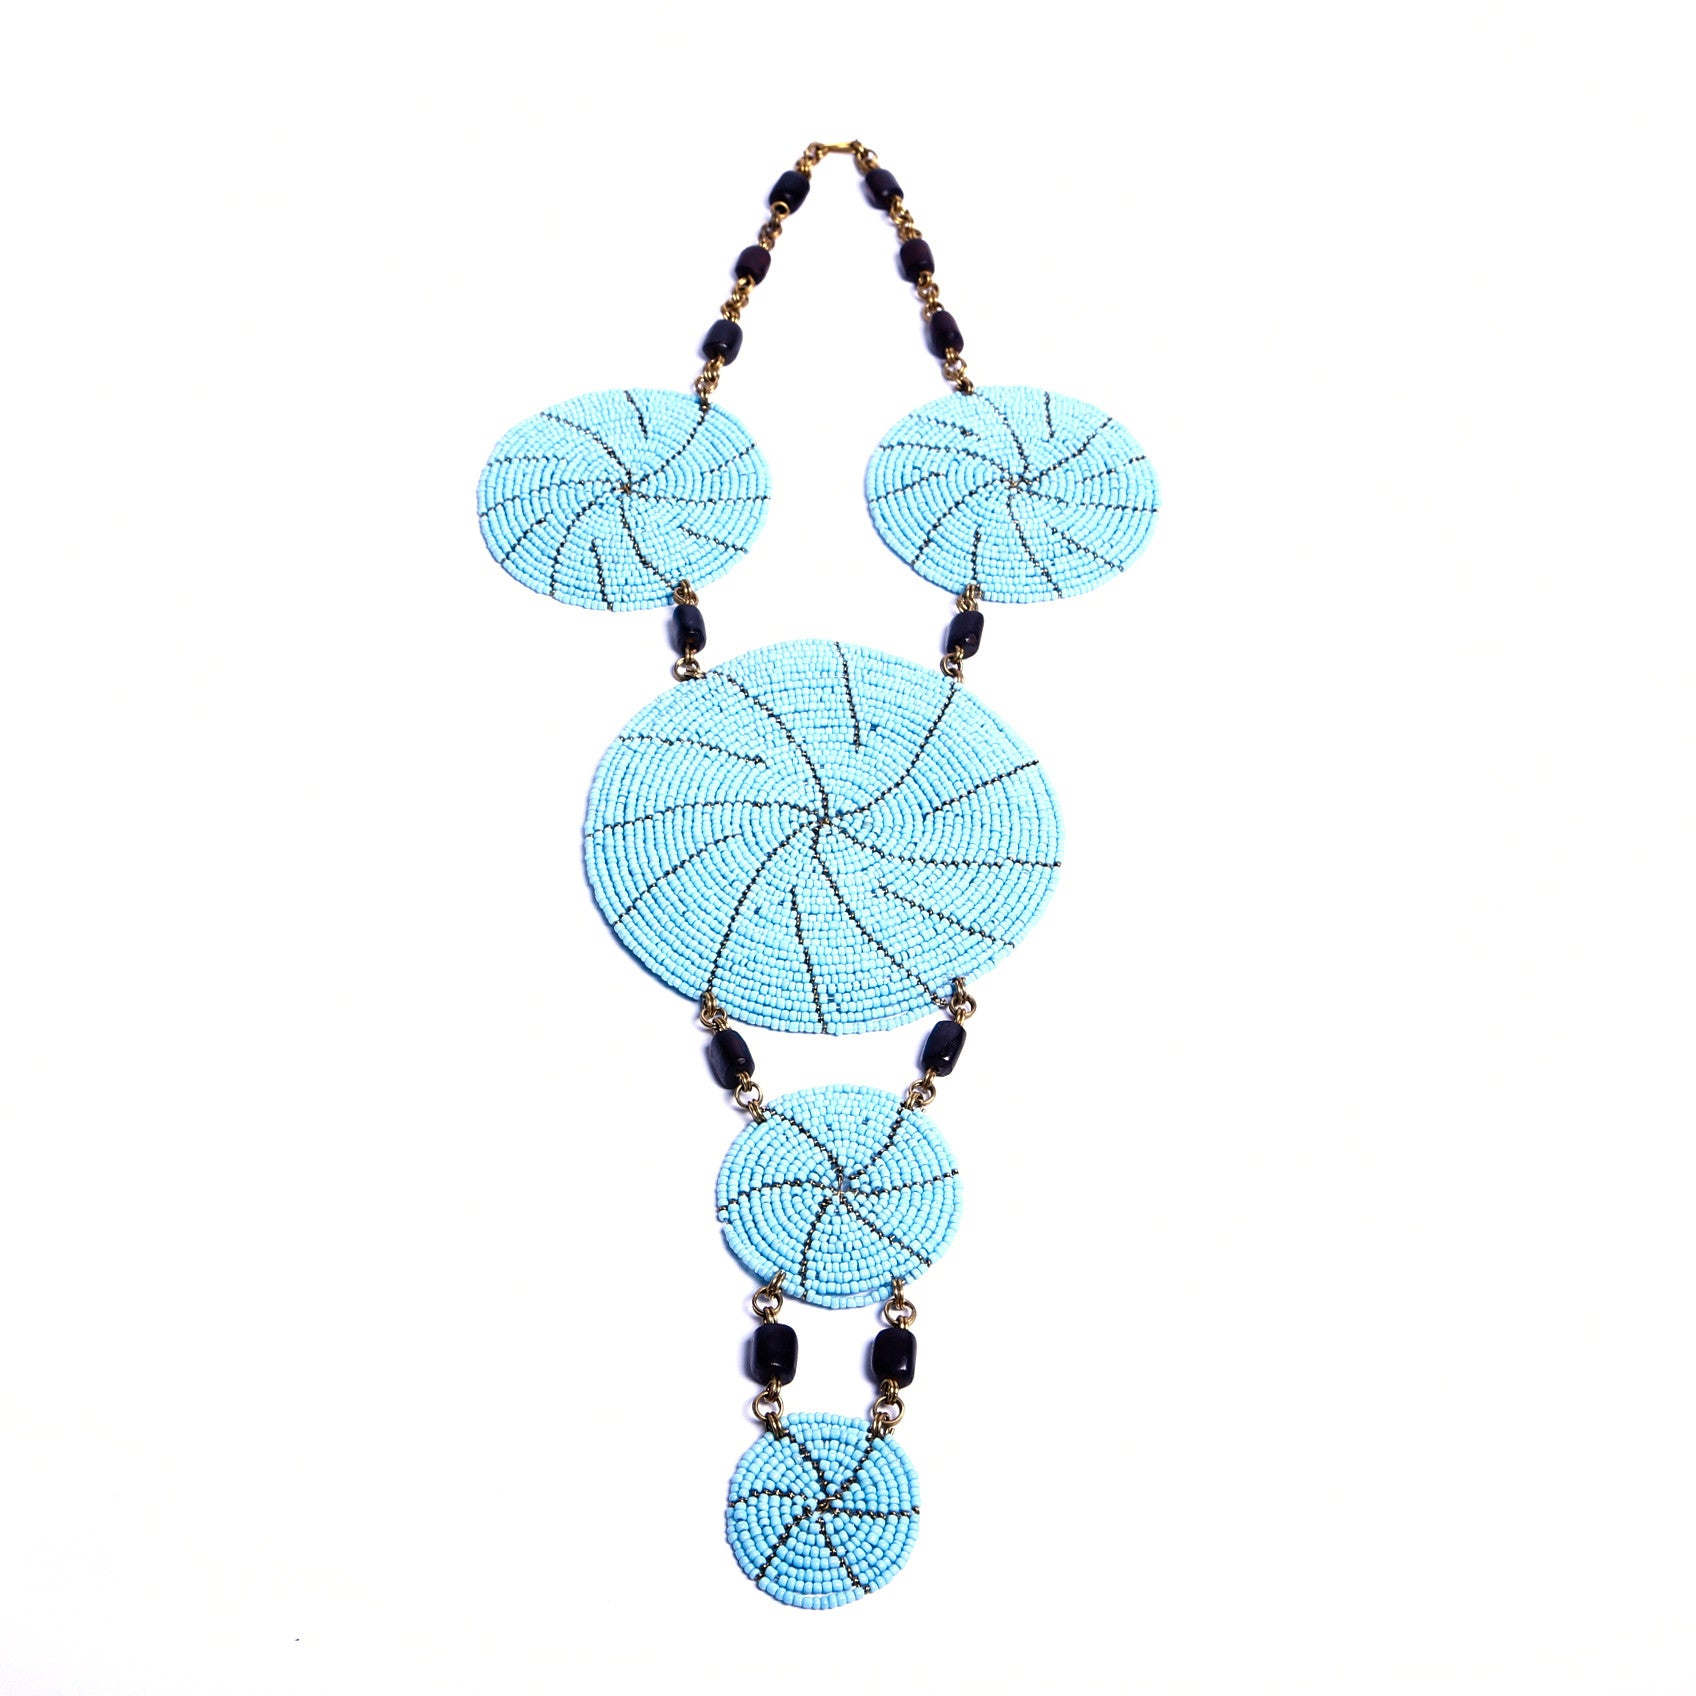 Eye-catching handcrafted statement necklace in this gorgeous sky blue. Each bead is intricately strung by hand. Truly unique and one-of-a-kind African necklace.